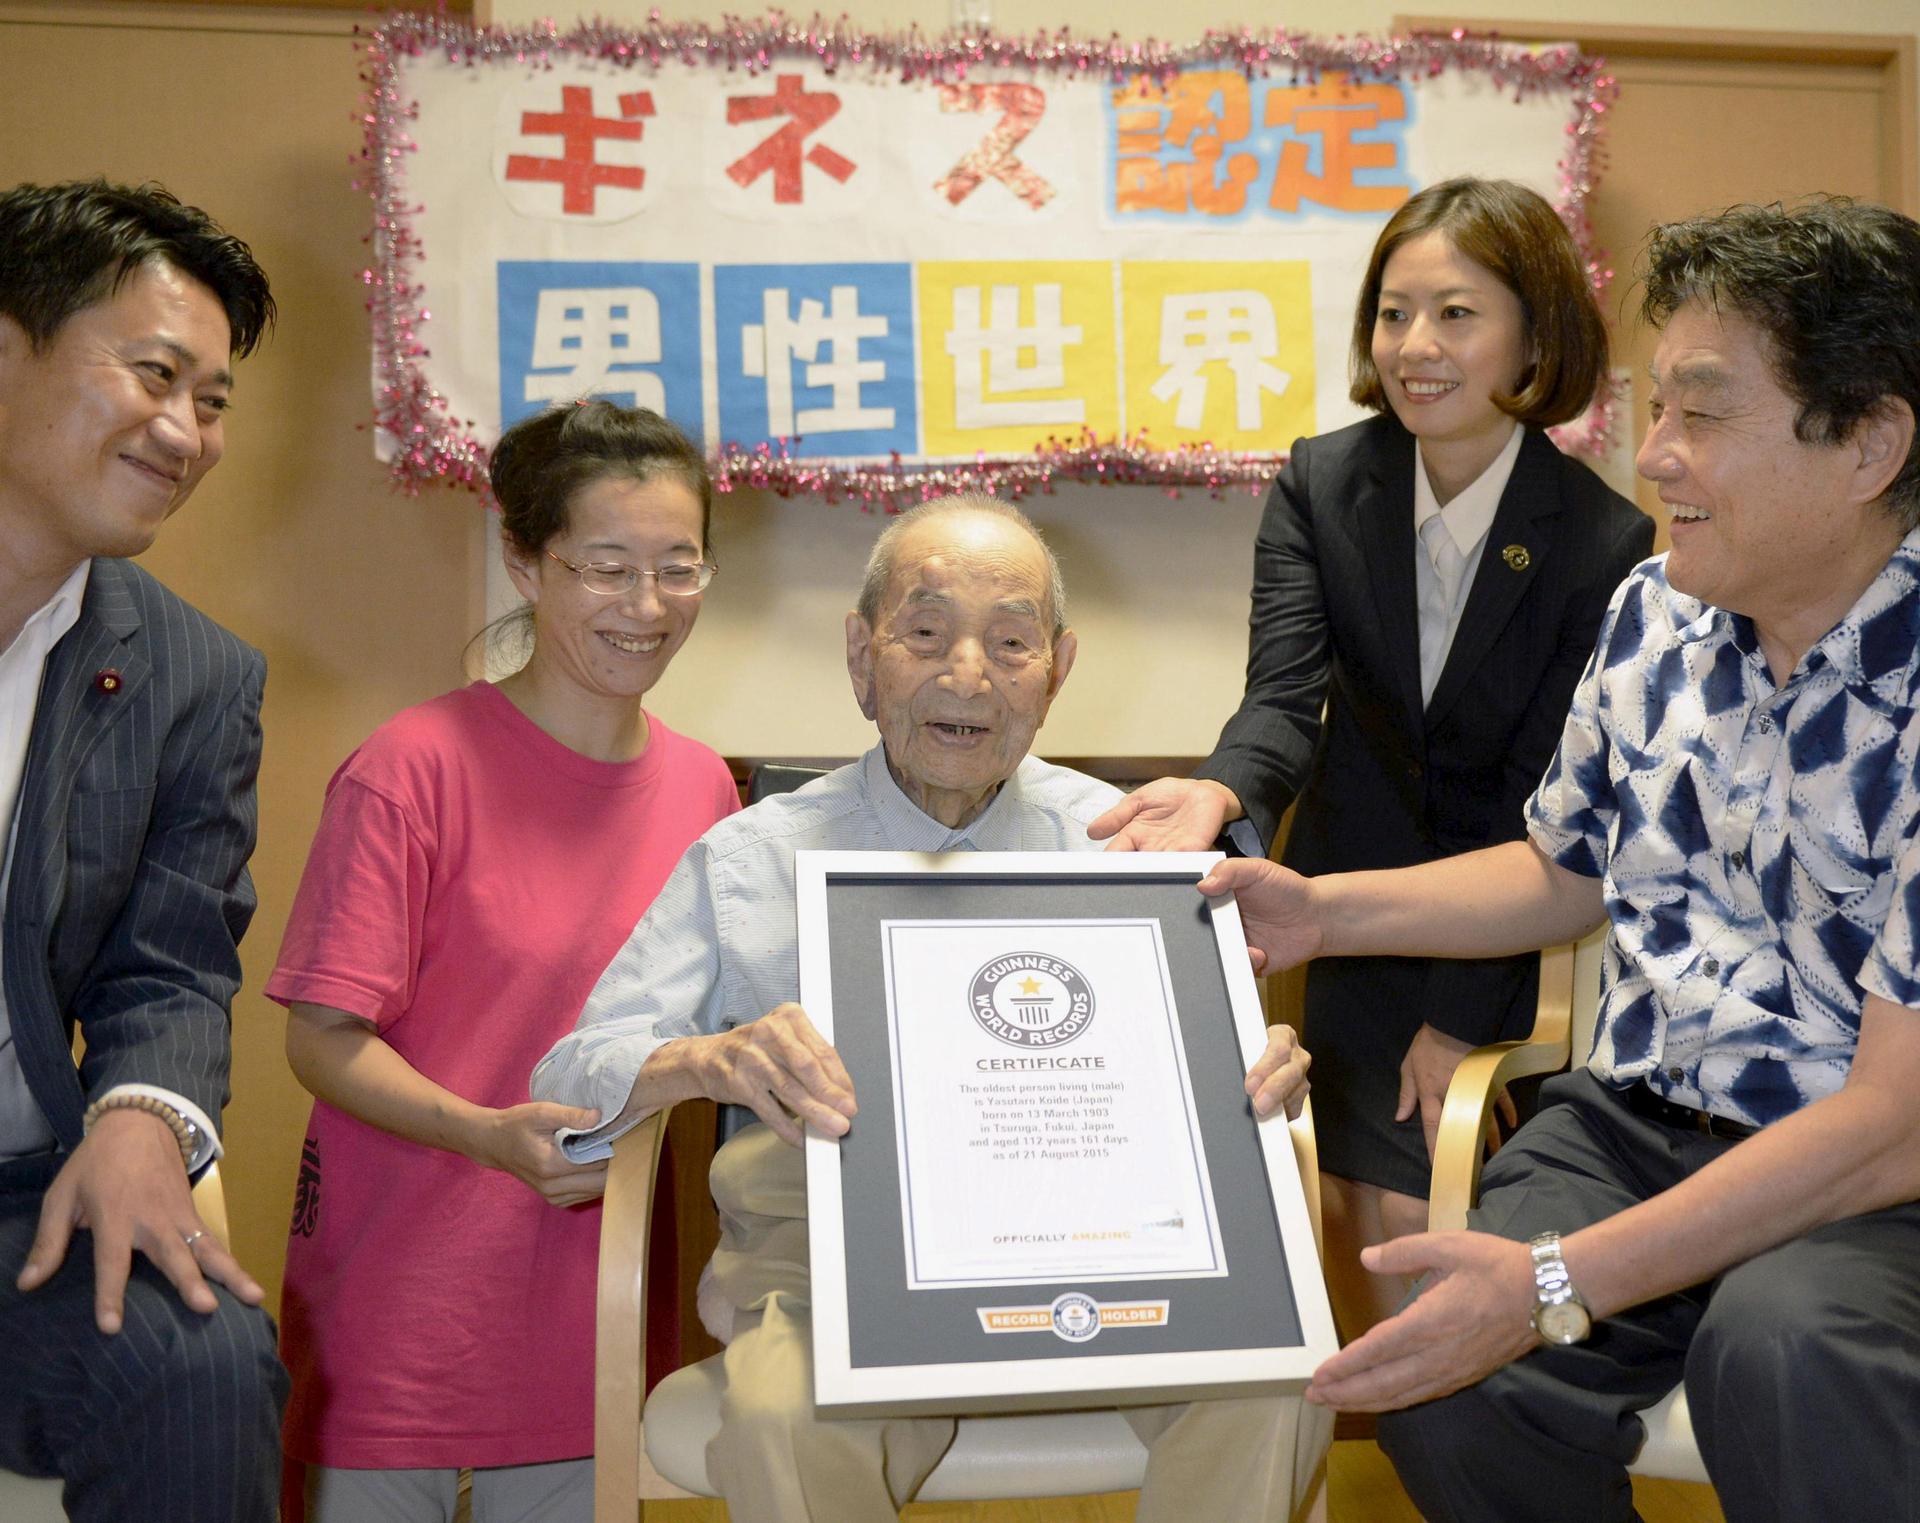 Japanese Yasutaro Koide, 112, receives the Guinness World Records certificate as he is formally recognized as the world's oldest man. He lives in a nursing home in Nagoya, in central Japan.